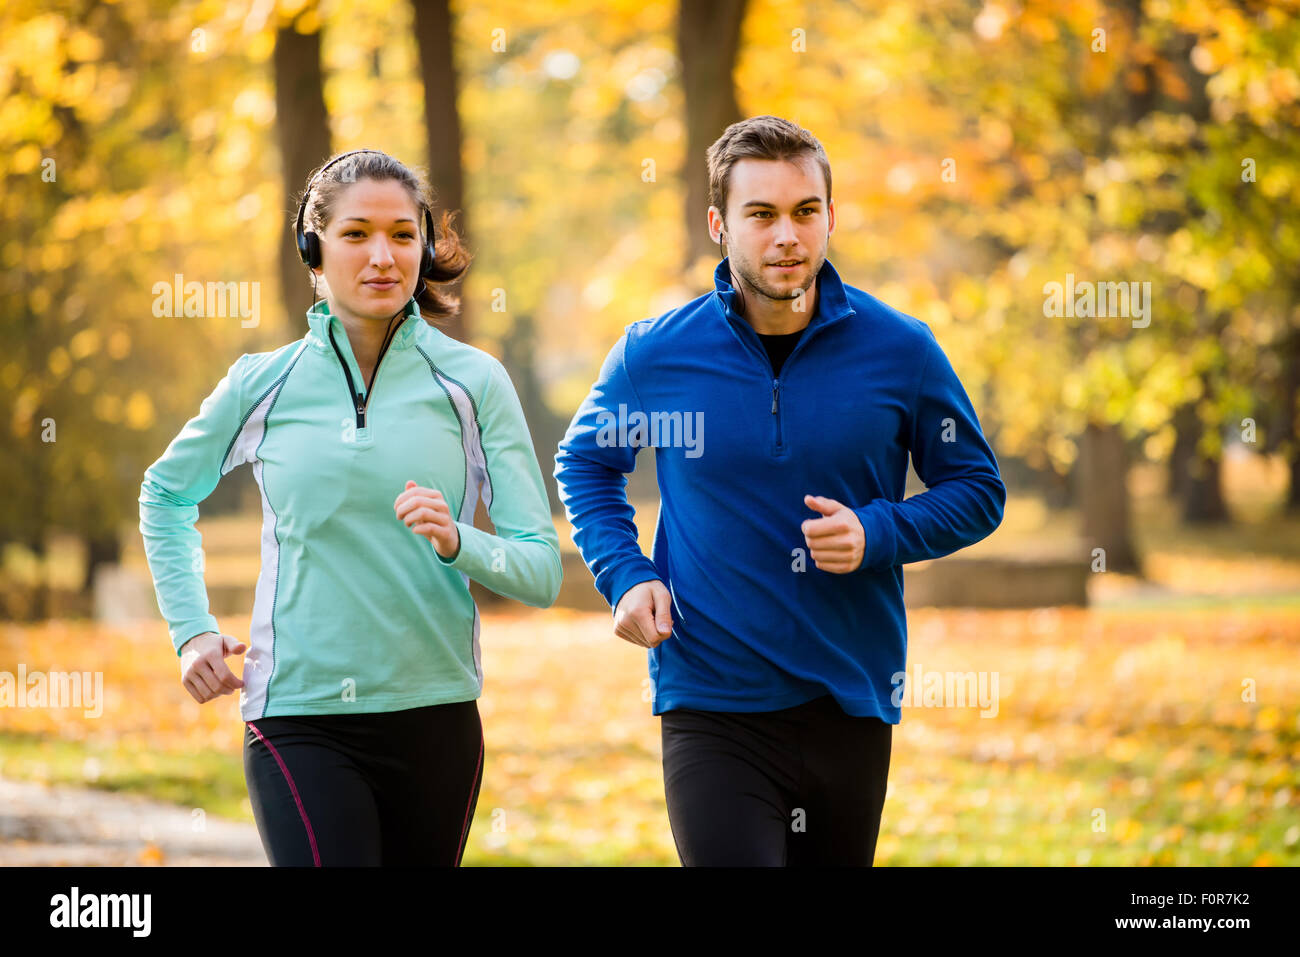 Couple jogging together in nature, woman listening music Stock Photo